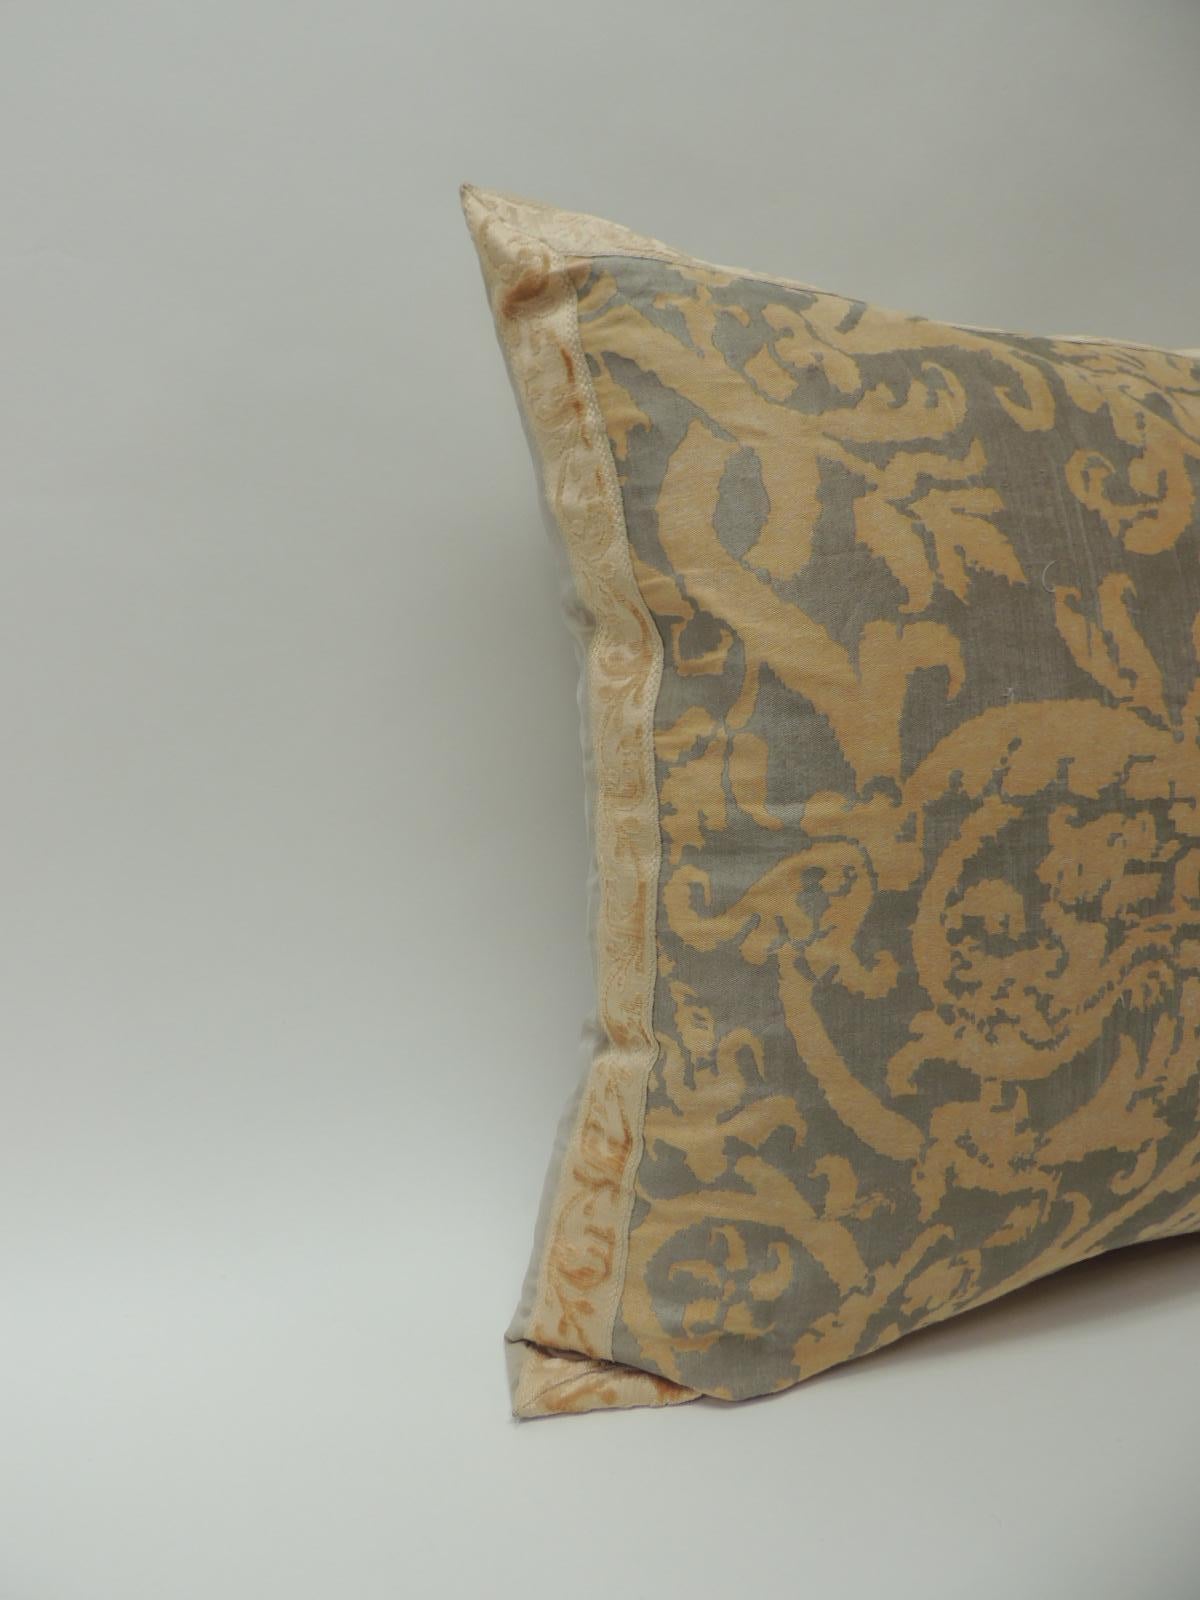 Vintage Fortuny pillow Pergolesi sand and gold color.
Accentuated with a soft peach chenille antique trim with mitered corners. Golden silk backing.
Decorative pillow handcrafted and designed in the USA. Closure by stitch (no zipper closure) with